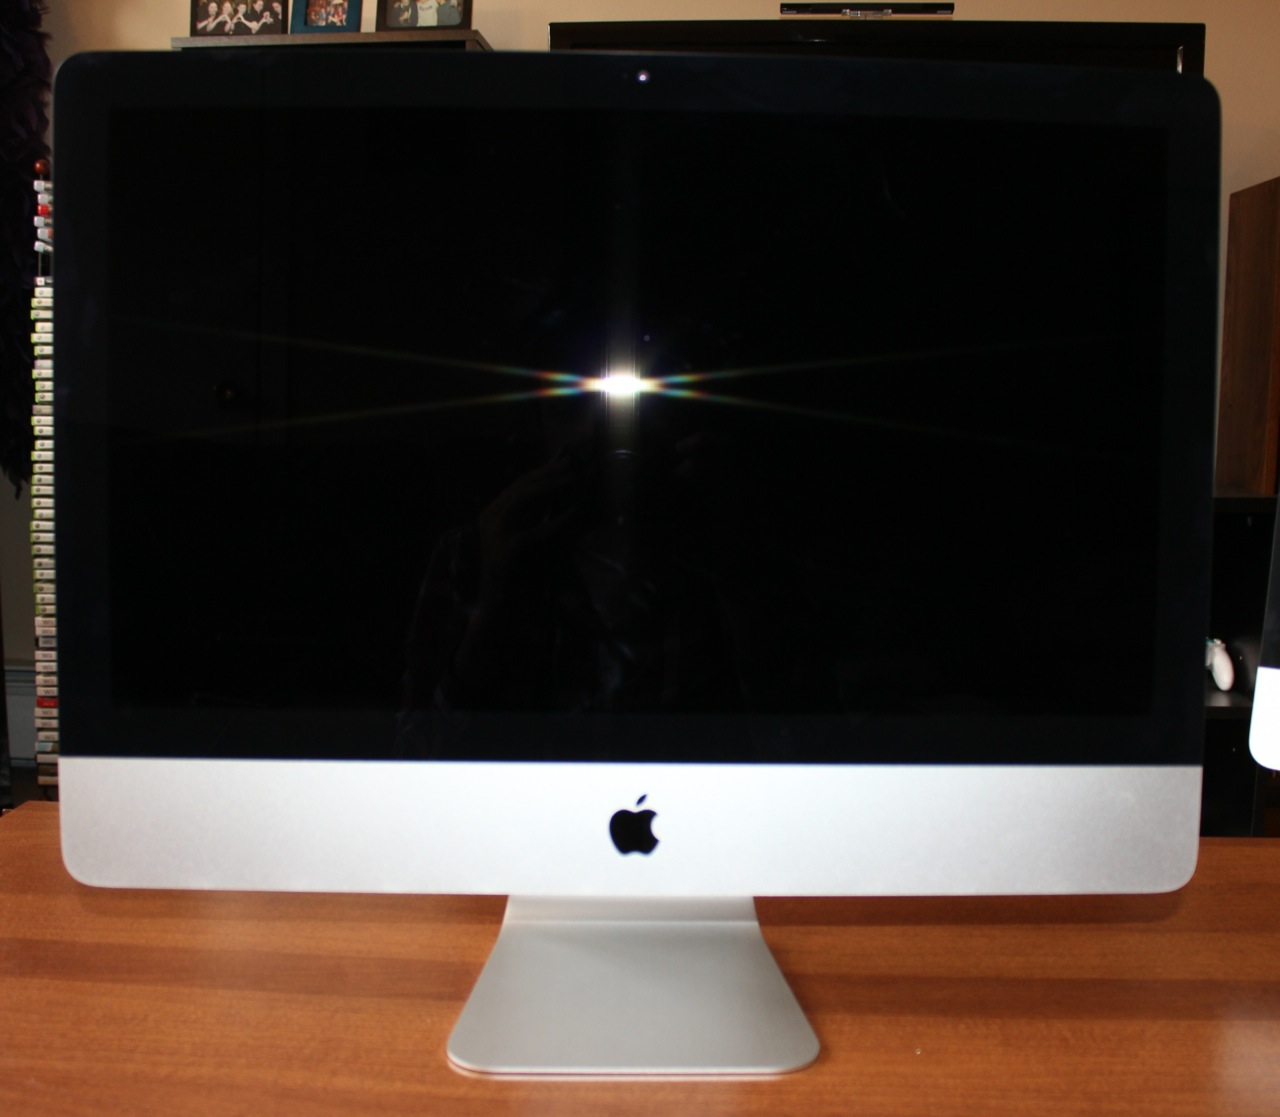 PC/タブレット デスクトップ型PC Review: 21.5-inch 2012 iMac takes two steps forward, one step back 